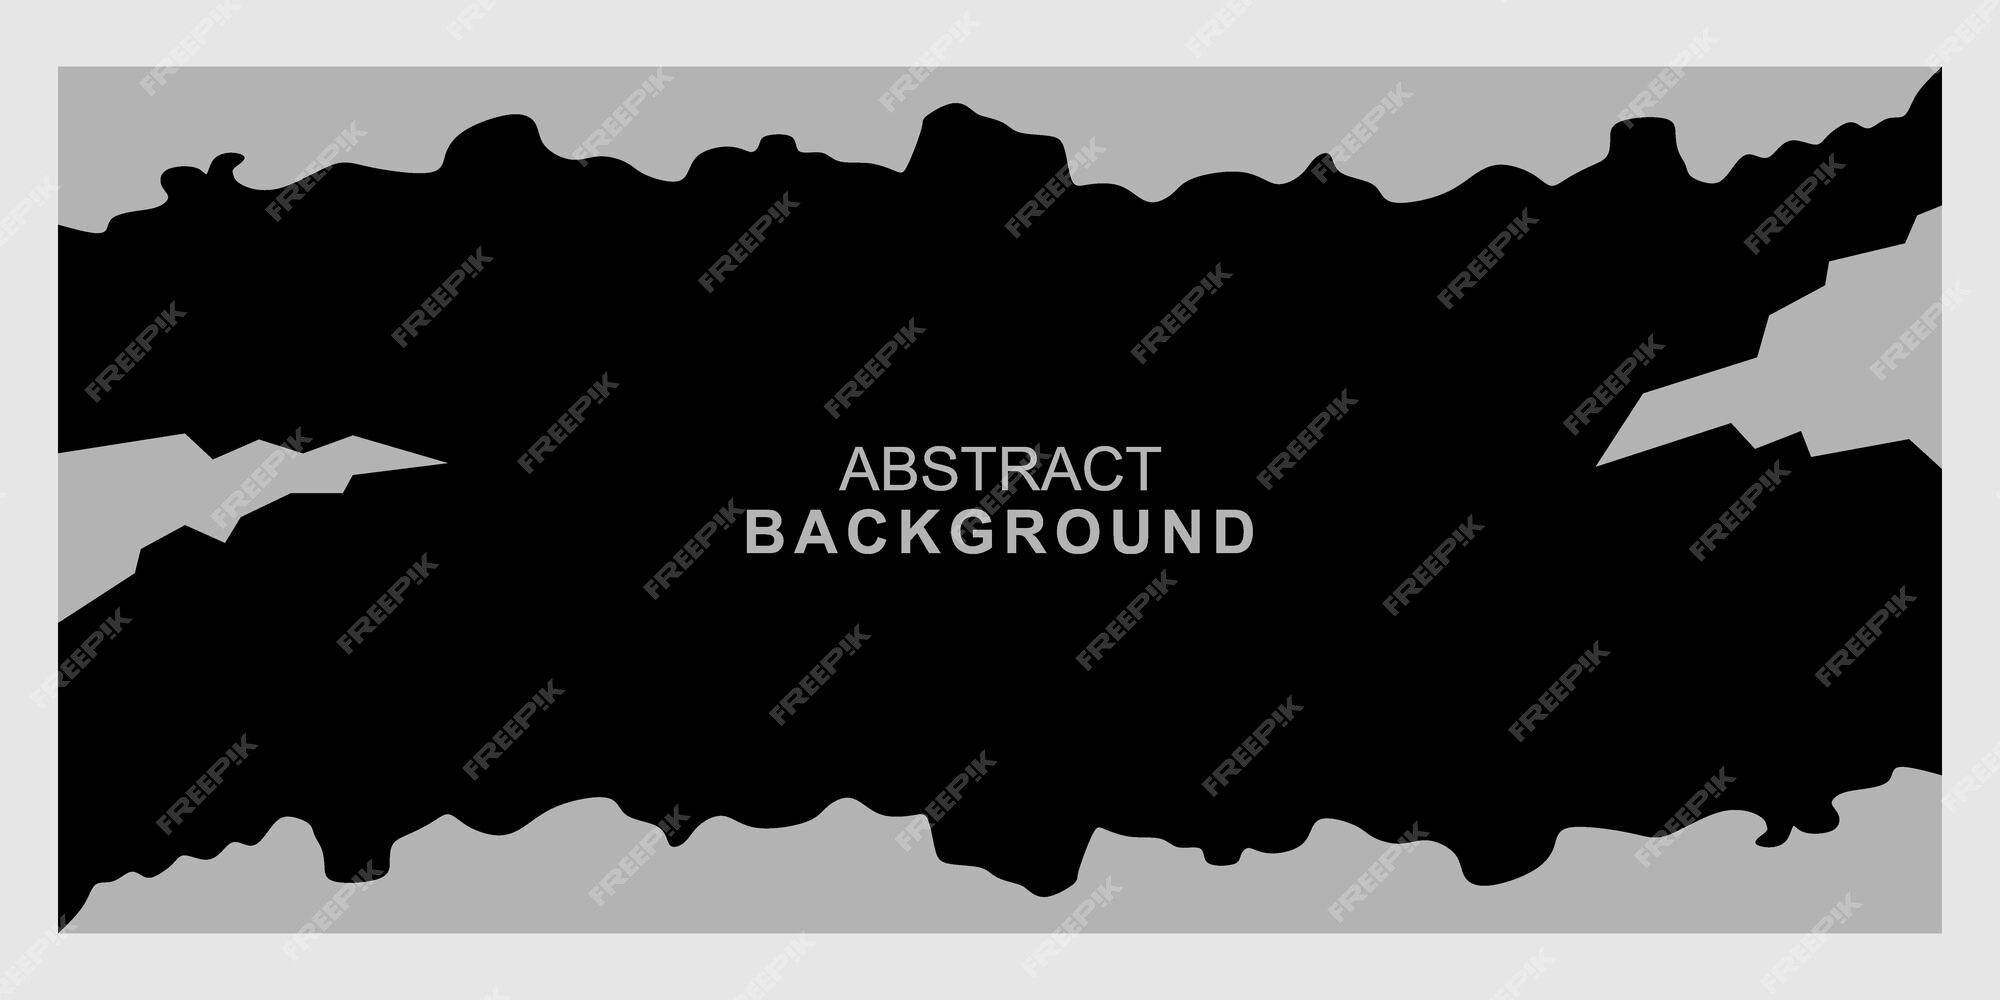 Abstract Background Images Vector Art, Icons, and Graphics for